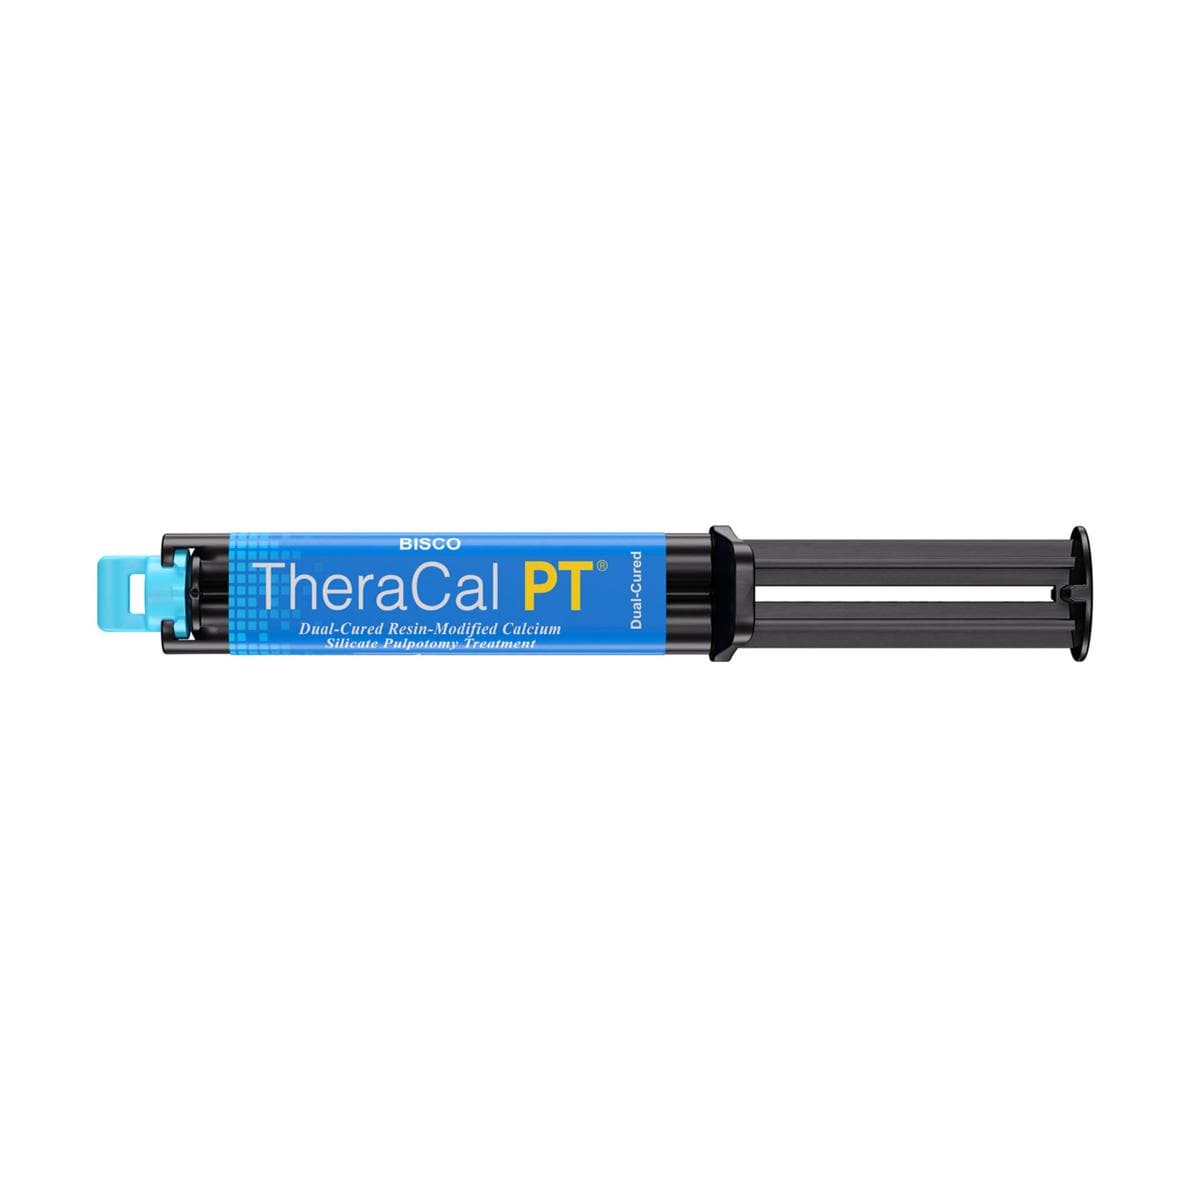 TheraCal PT - REF. H-34110P, spuit 4 g